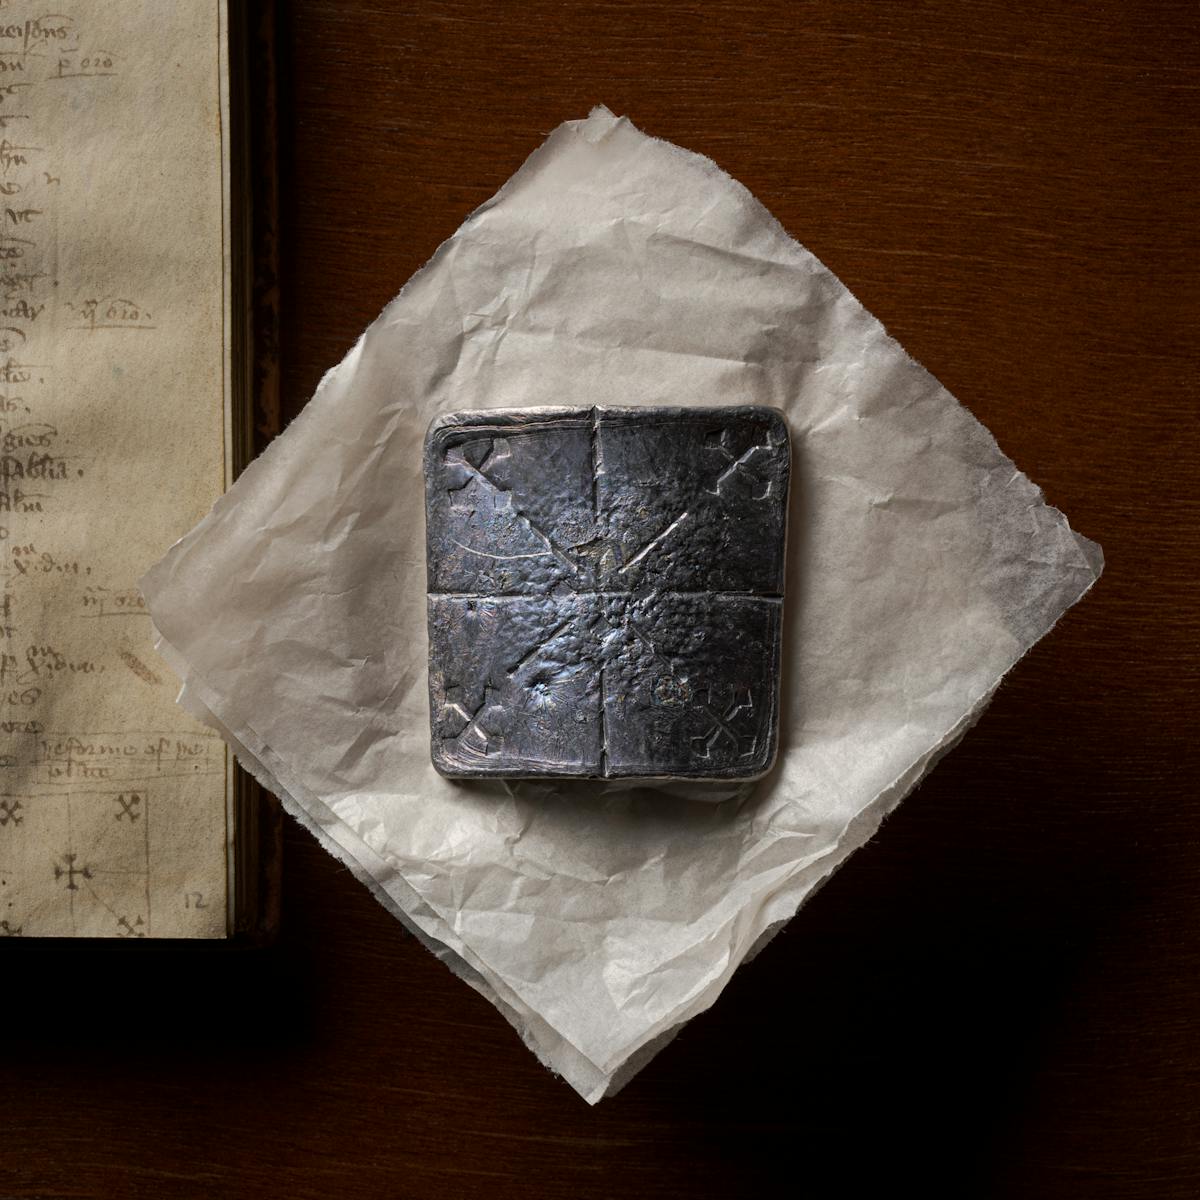 Photograph of a curved lead healing plate about ten centimetres square, sitting flat on a piece of conservation paper.  Below the lead plate, to the left, is the manuscript from which the original instructions to make the plate can be found.  The lead plate has been inscribed with 5 crosses; one diagonal cross in each corner with lines leading to a central, right-way-up, cross.